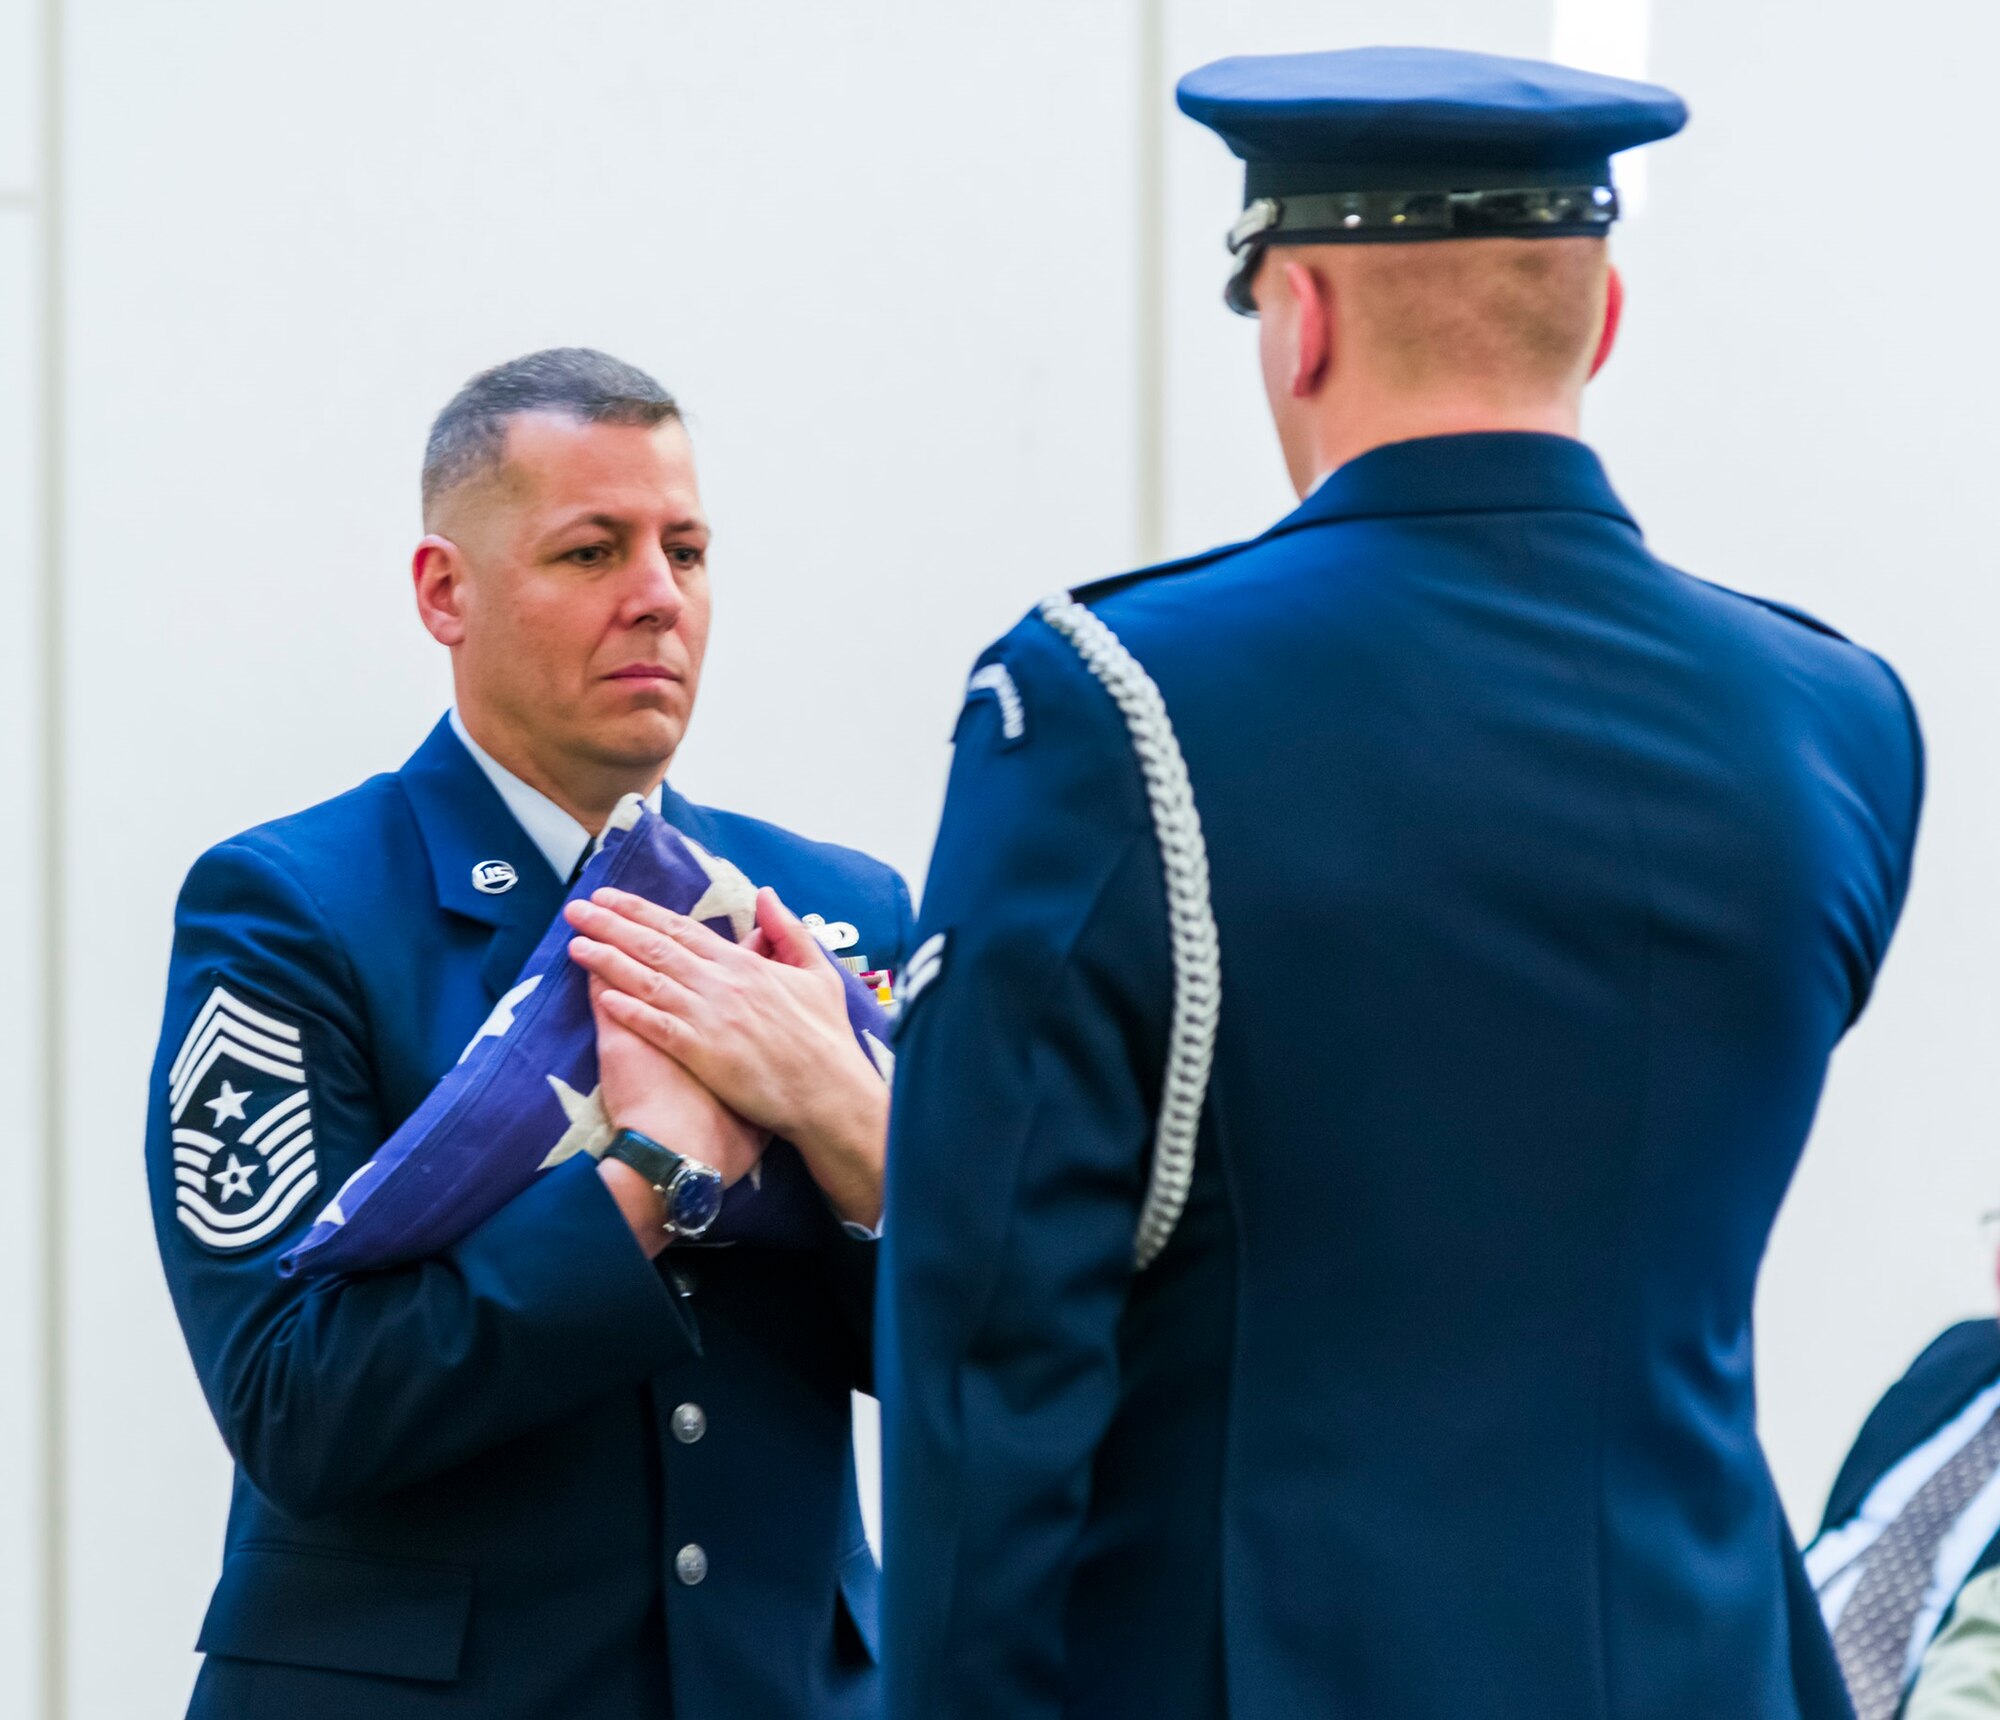 AFOSI Command Chief Master Sgt. #15 Christopher J. VanBurger, accepts the United States Flag from a member of the JBA Honor Guard during Chief VanBurger's retirement ceremony at Quantico, Va., Jan. 26, 2018. (U.S. Air Force photo by Michael Hastings)